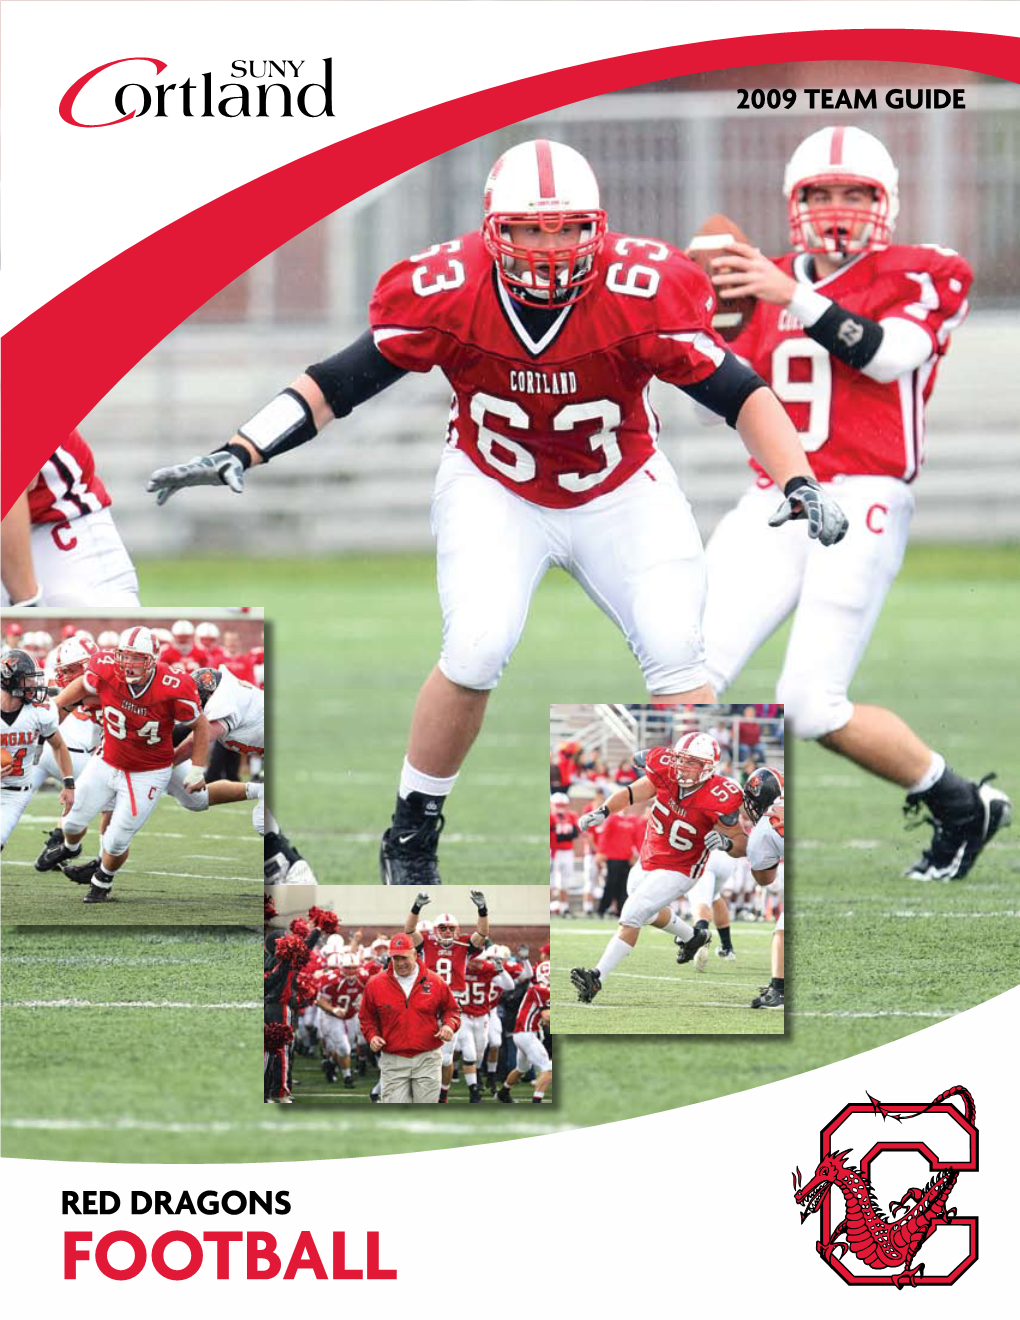 RED DRAGONS FOOTBALL NJAC Title and Lambert Award Among 2008 Season Highlights Cortland Enjoyed One of the Best Seasons in School History During the 2008 Campaign